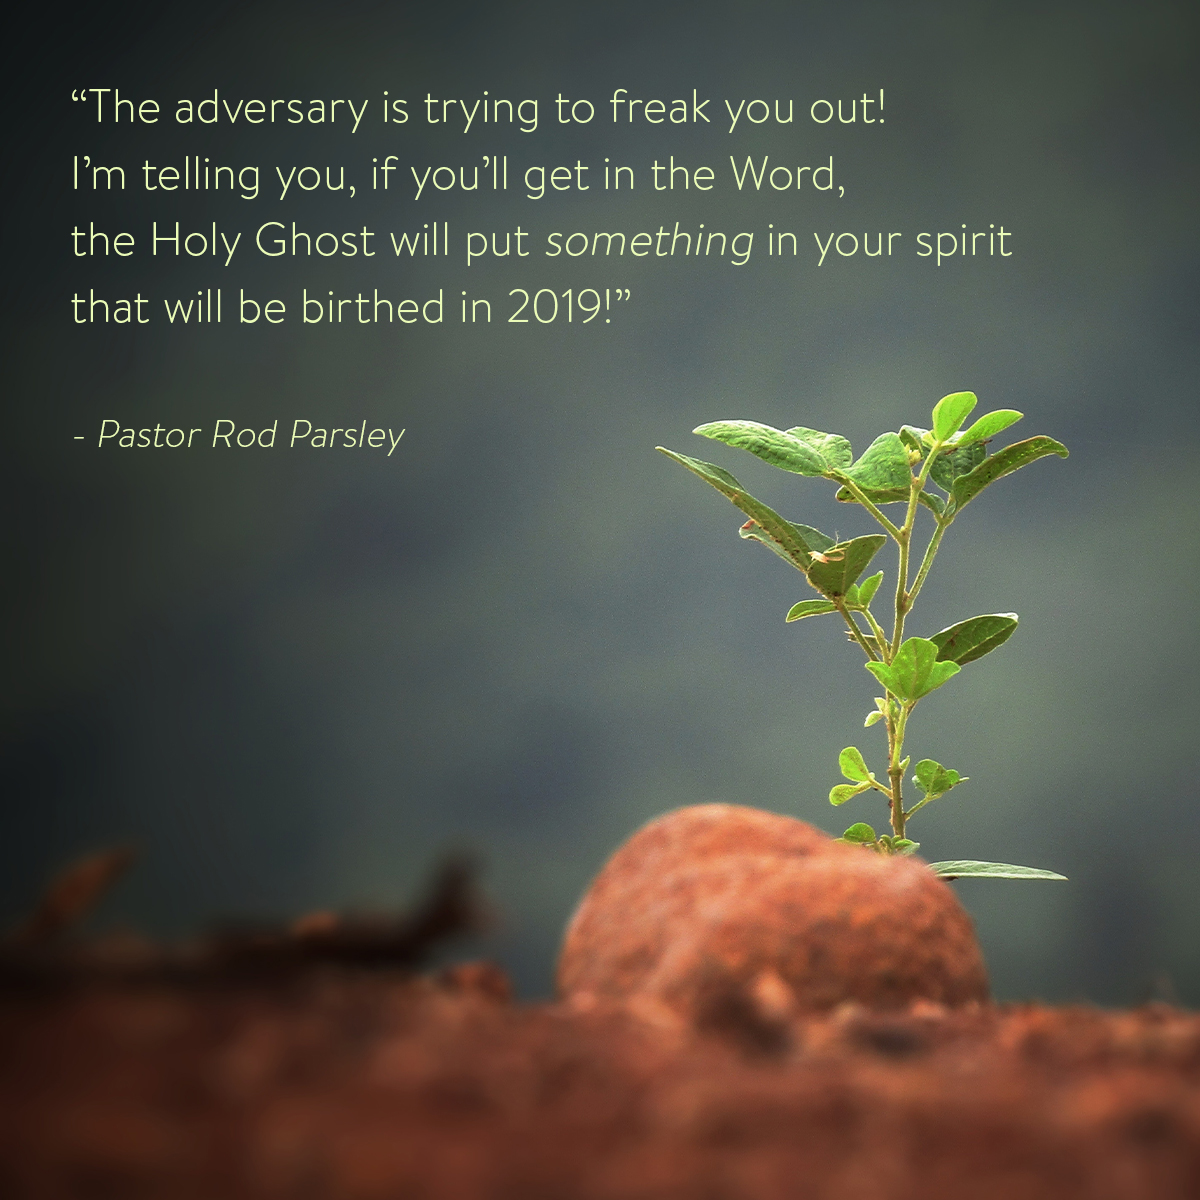 “The adversary is trying to freak you out! I’m telling you, if you’ll get in the Word, the Holy Ghost will put something in your spirit that will be birthed in 2019!” – Pastor Rod Parsley